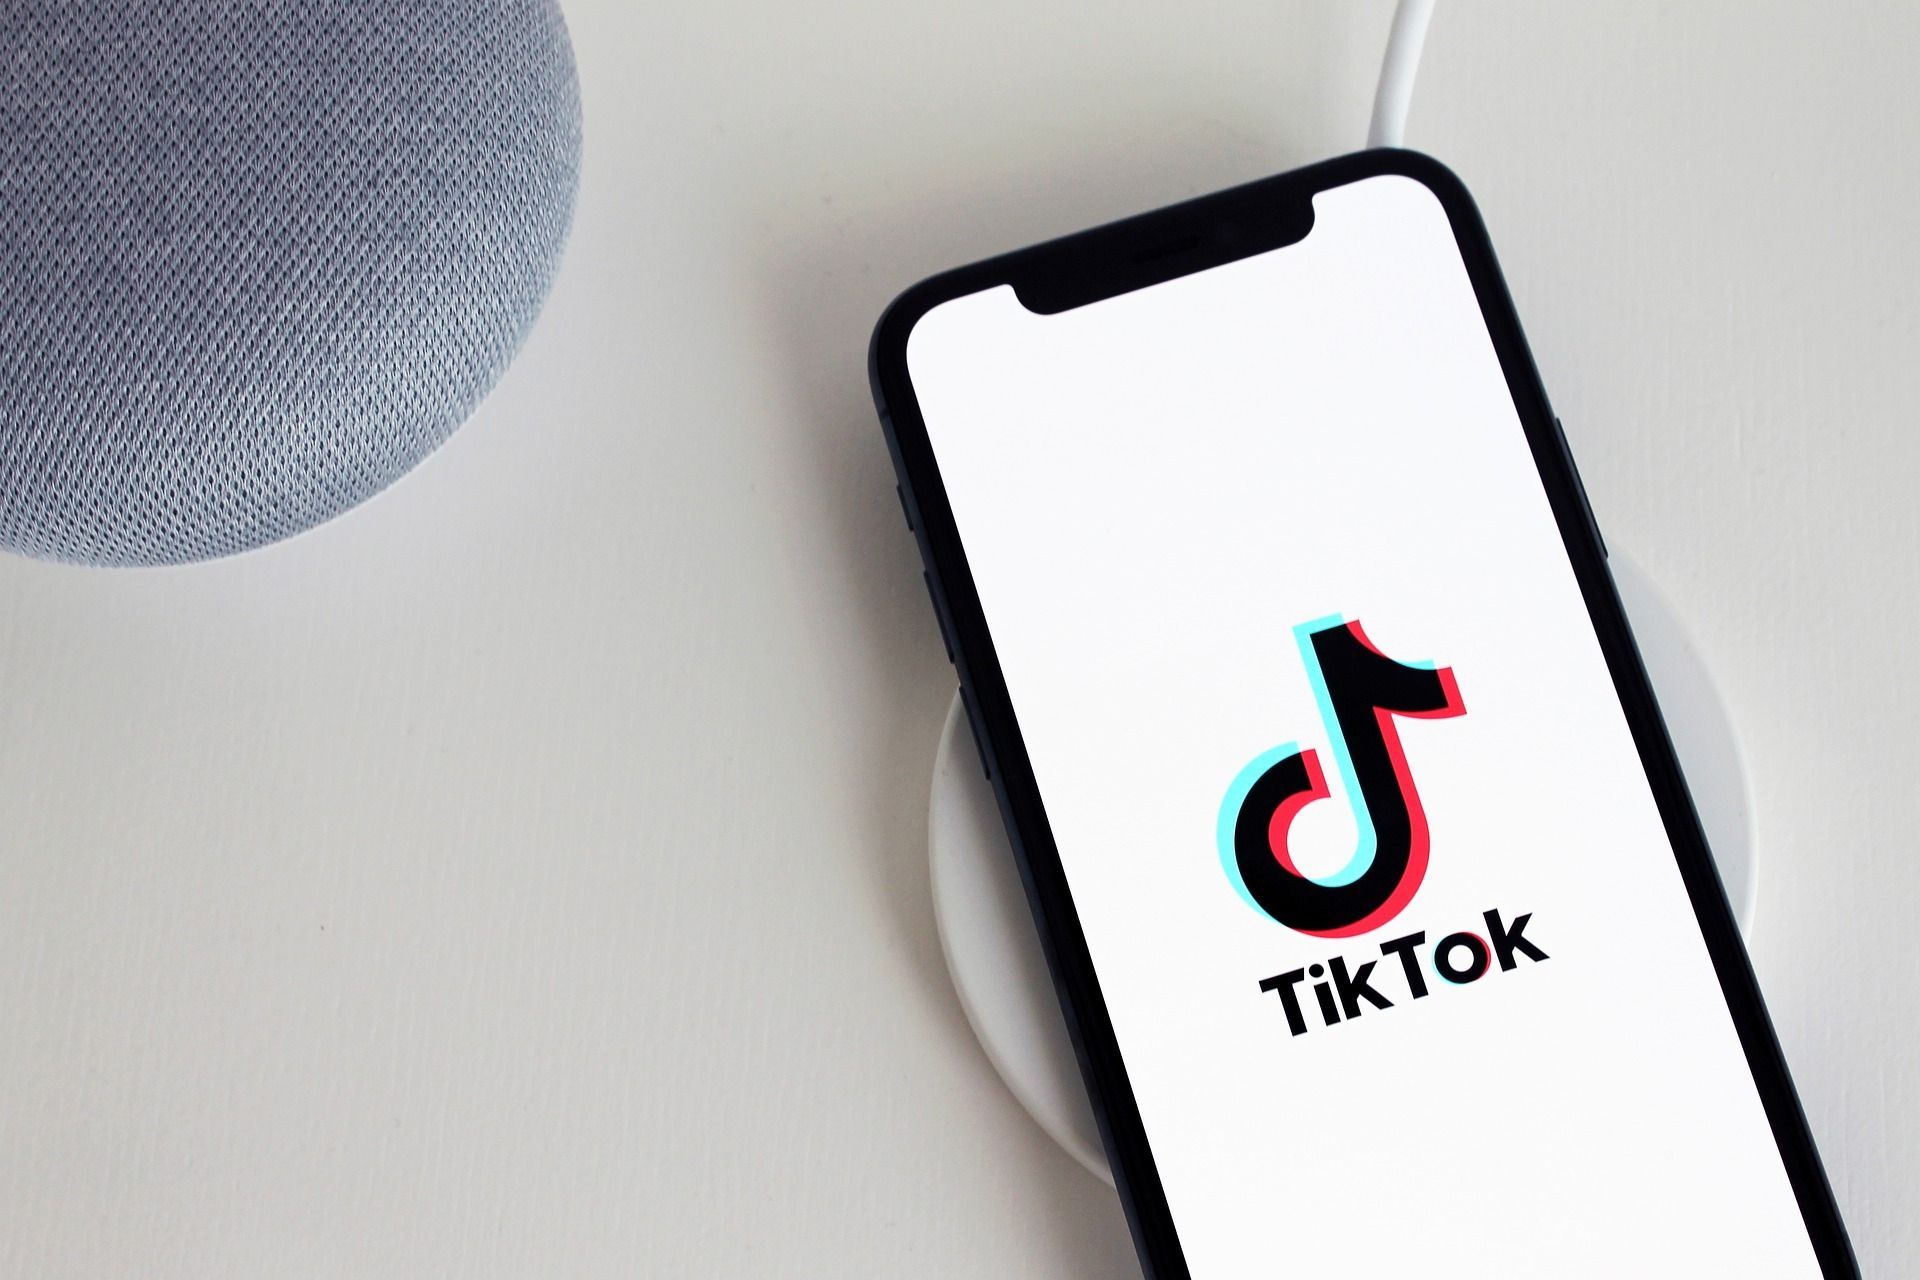 TikTok ethnicity filter: How to get and use it?